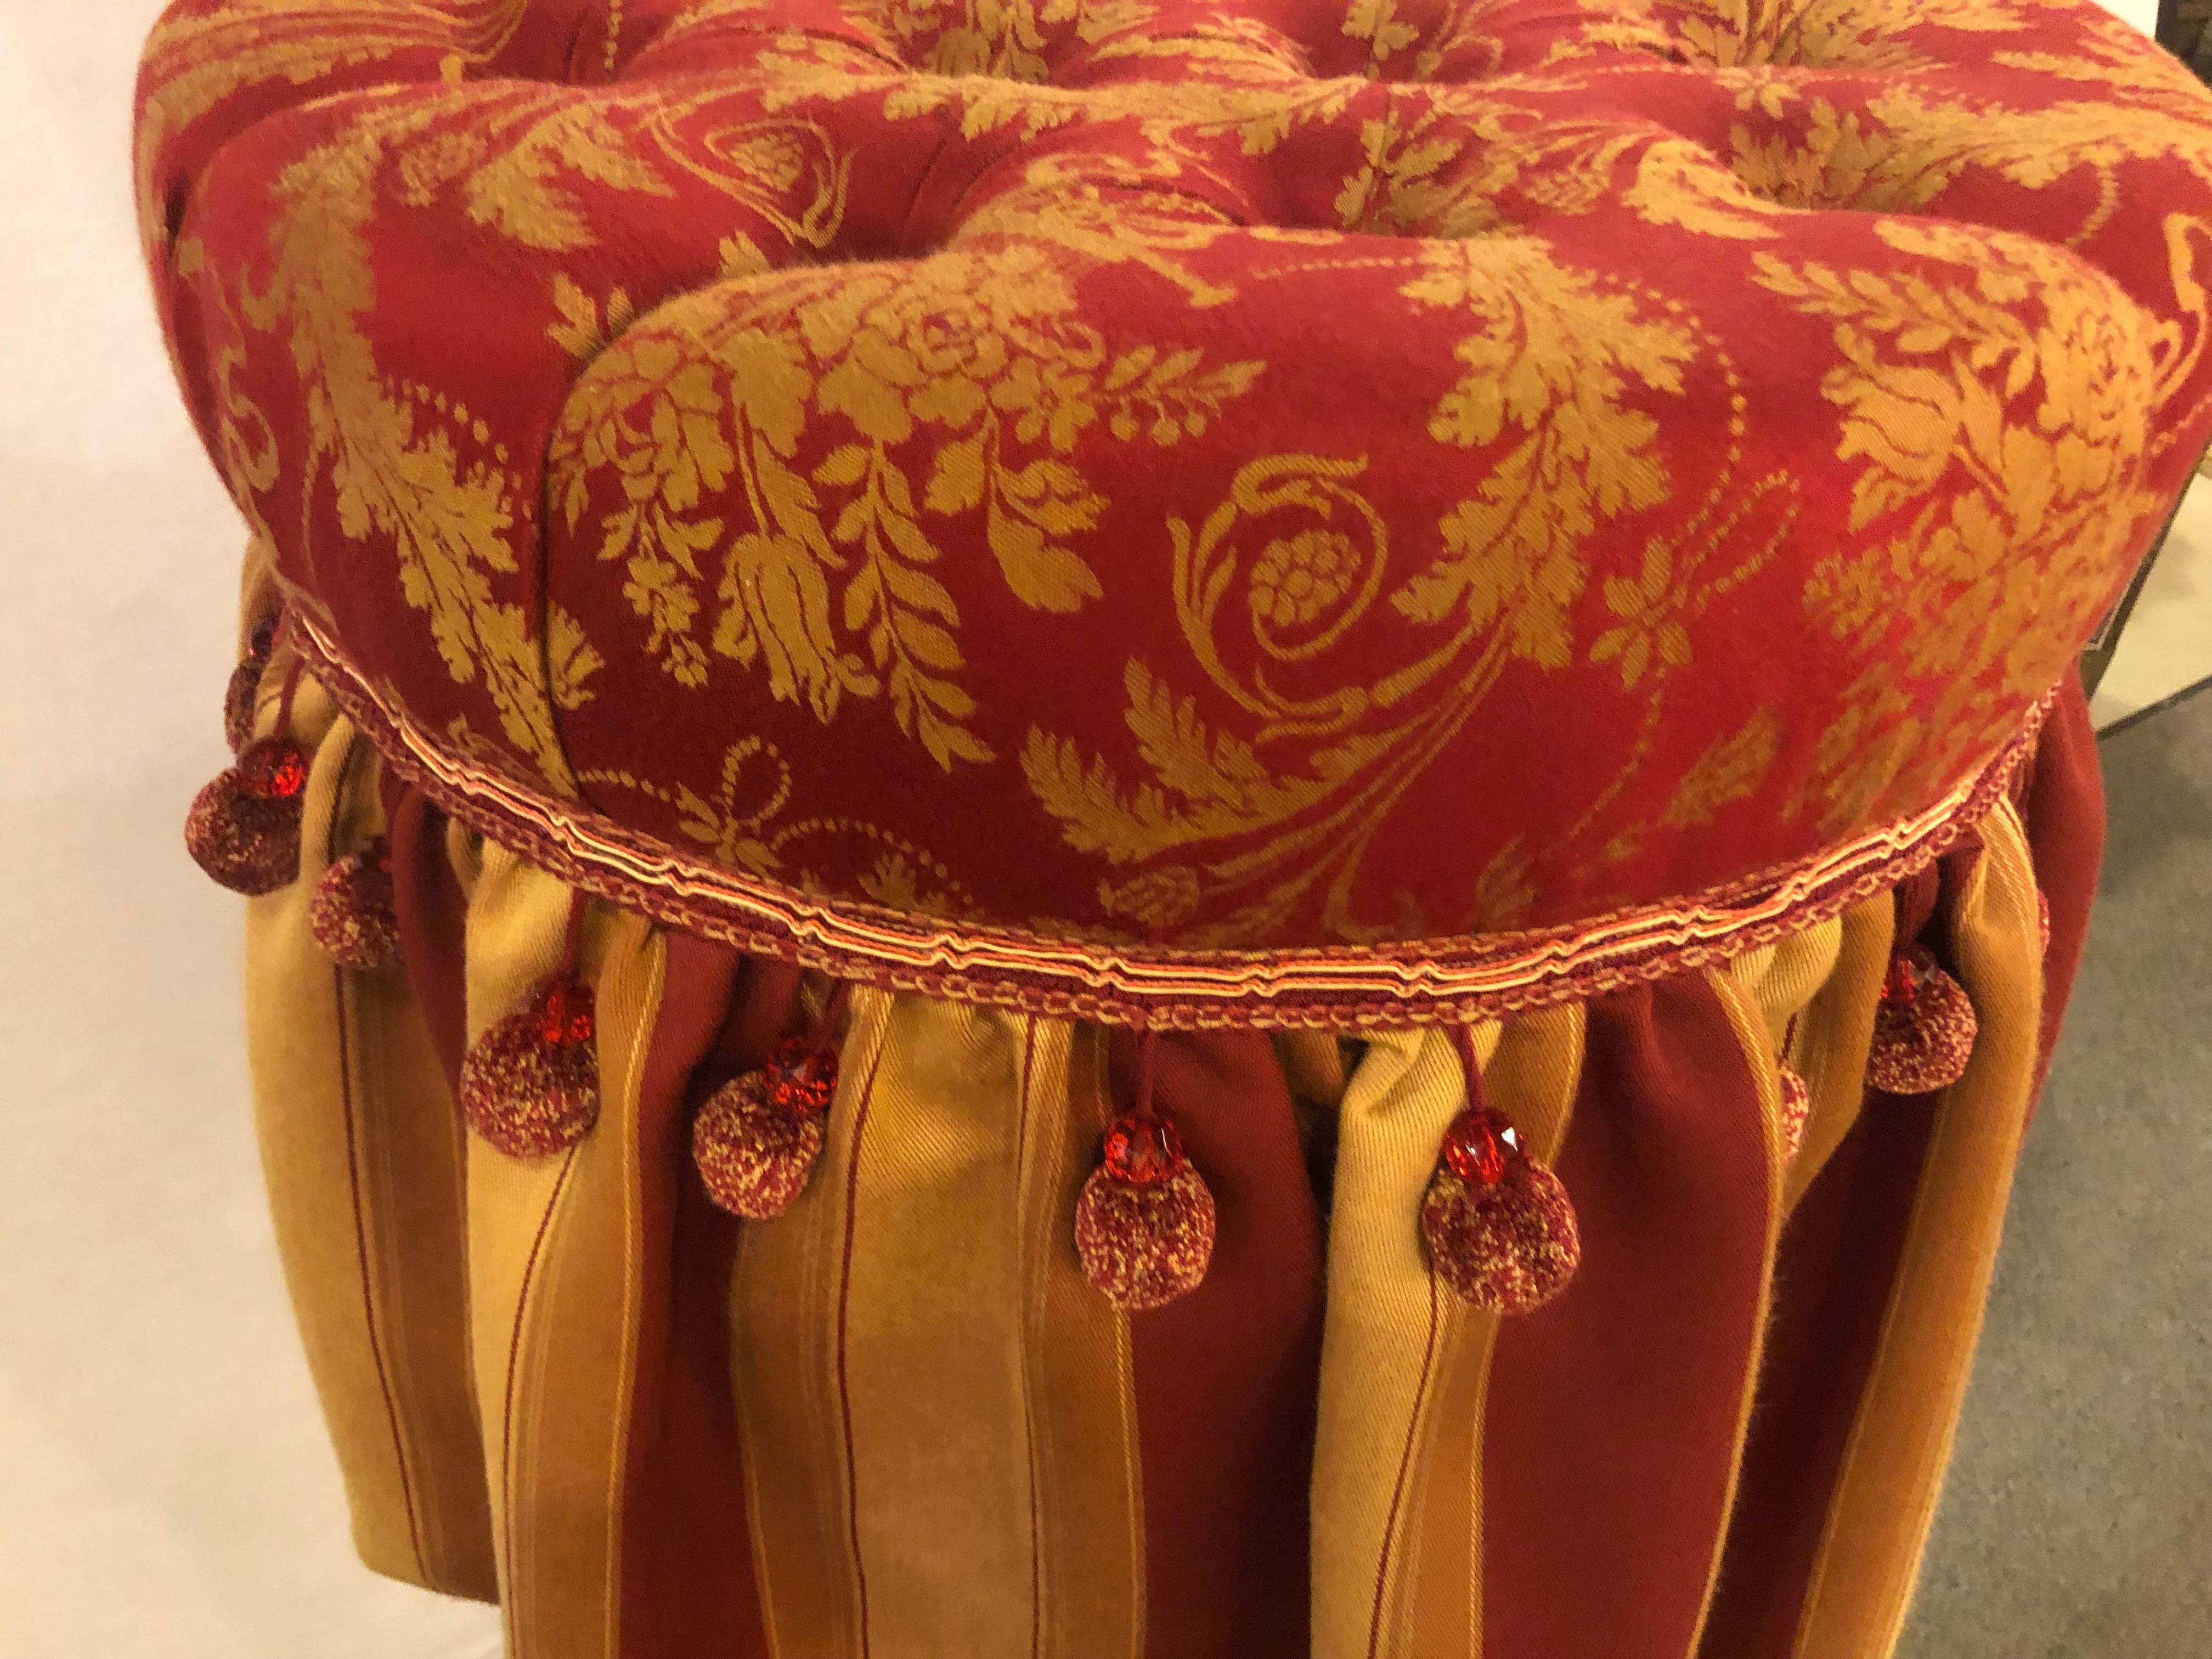 Deco Upholstered Tufted Red and Gilt Decorated Ottoman or Footstool (20. Jahrhundert)